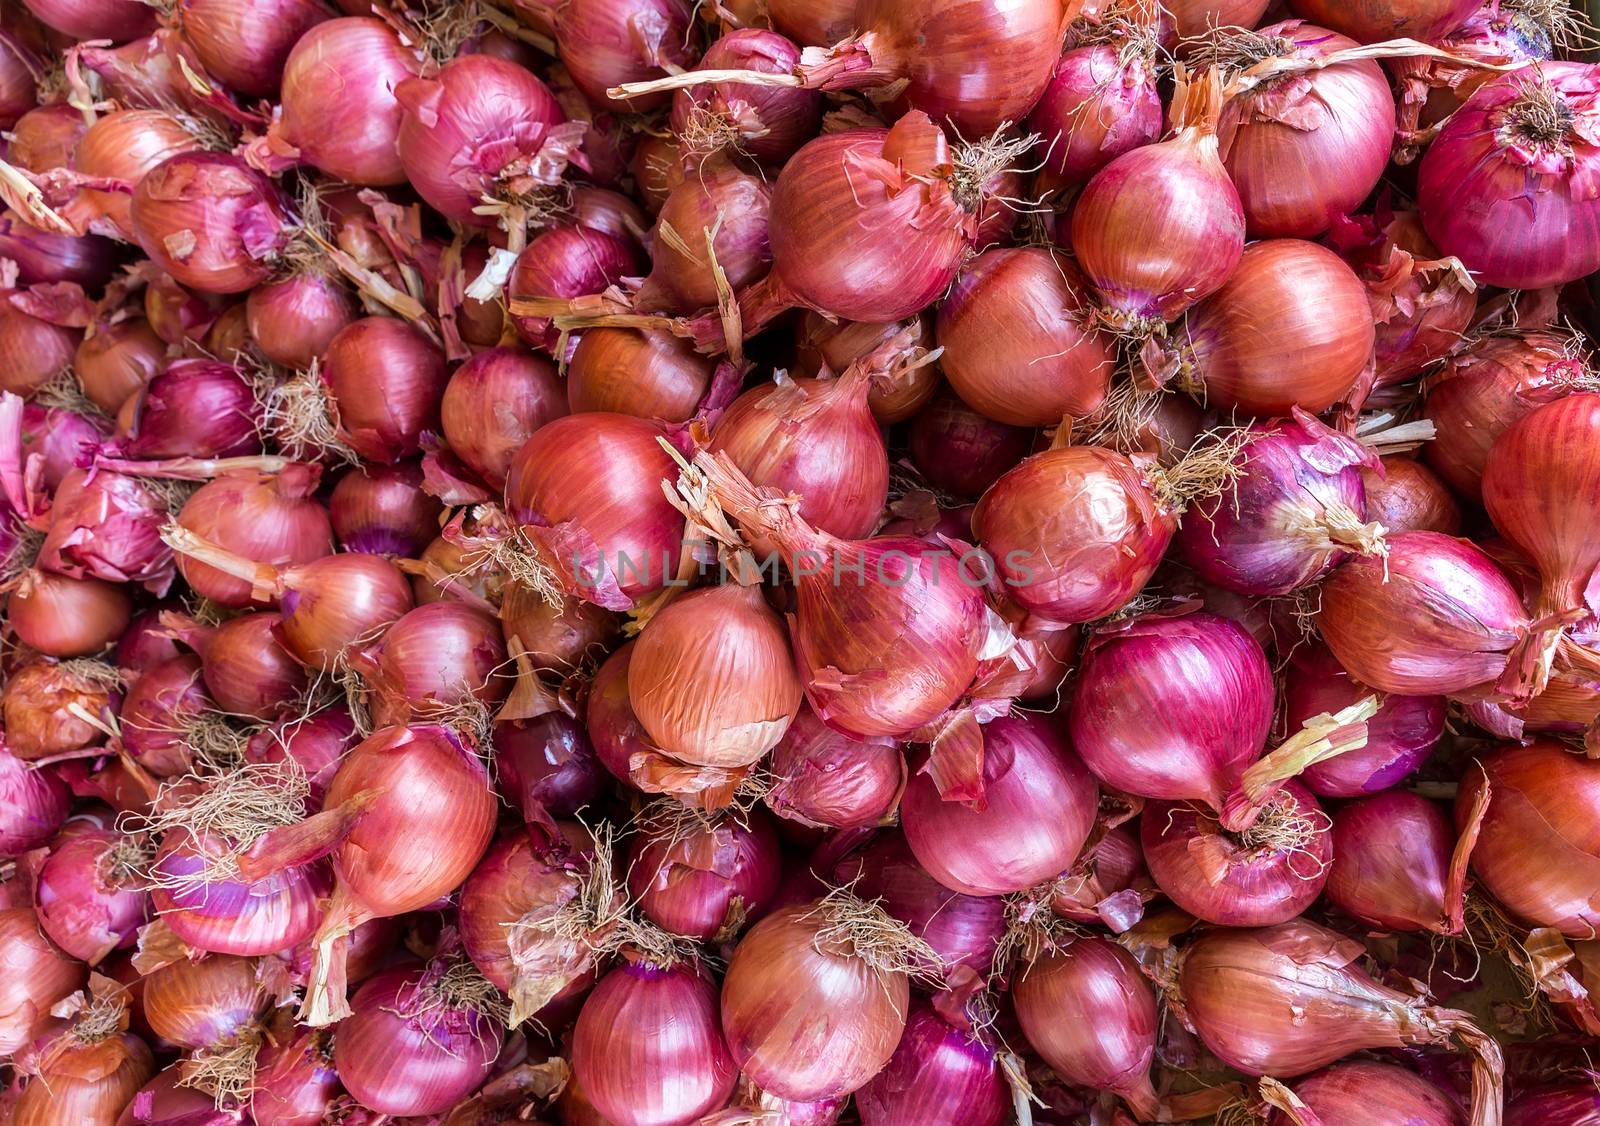 Heap of red onions on market place